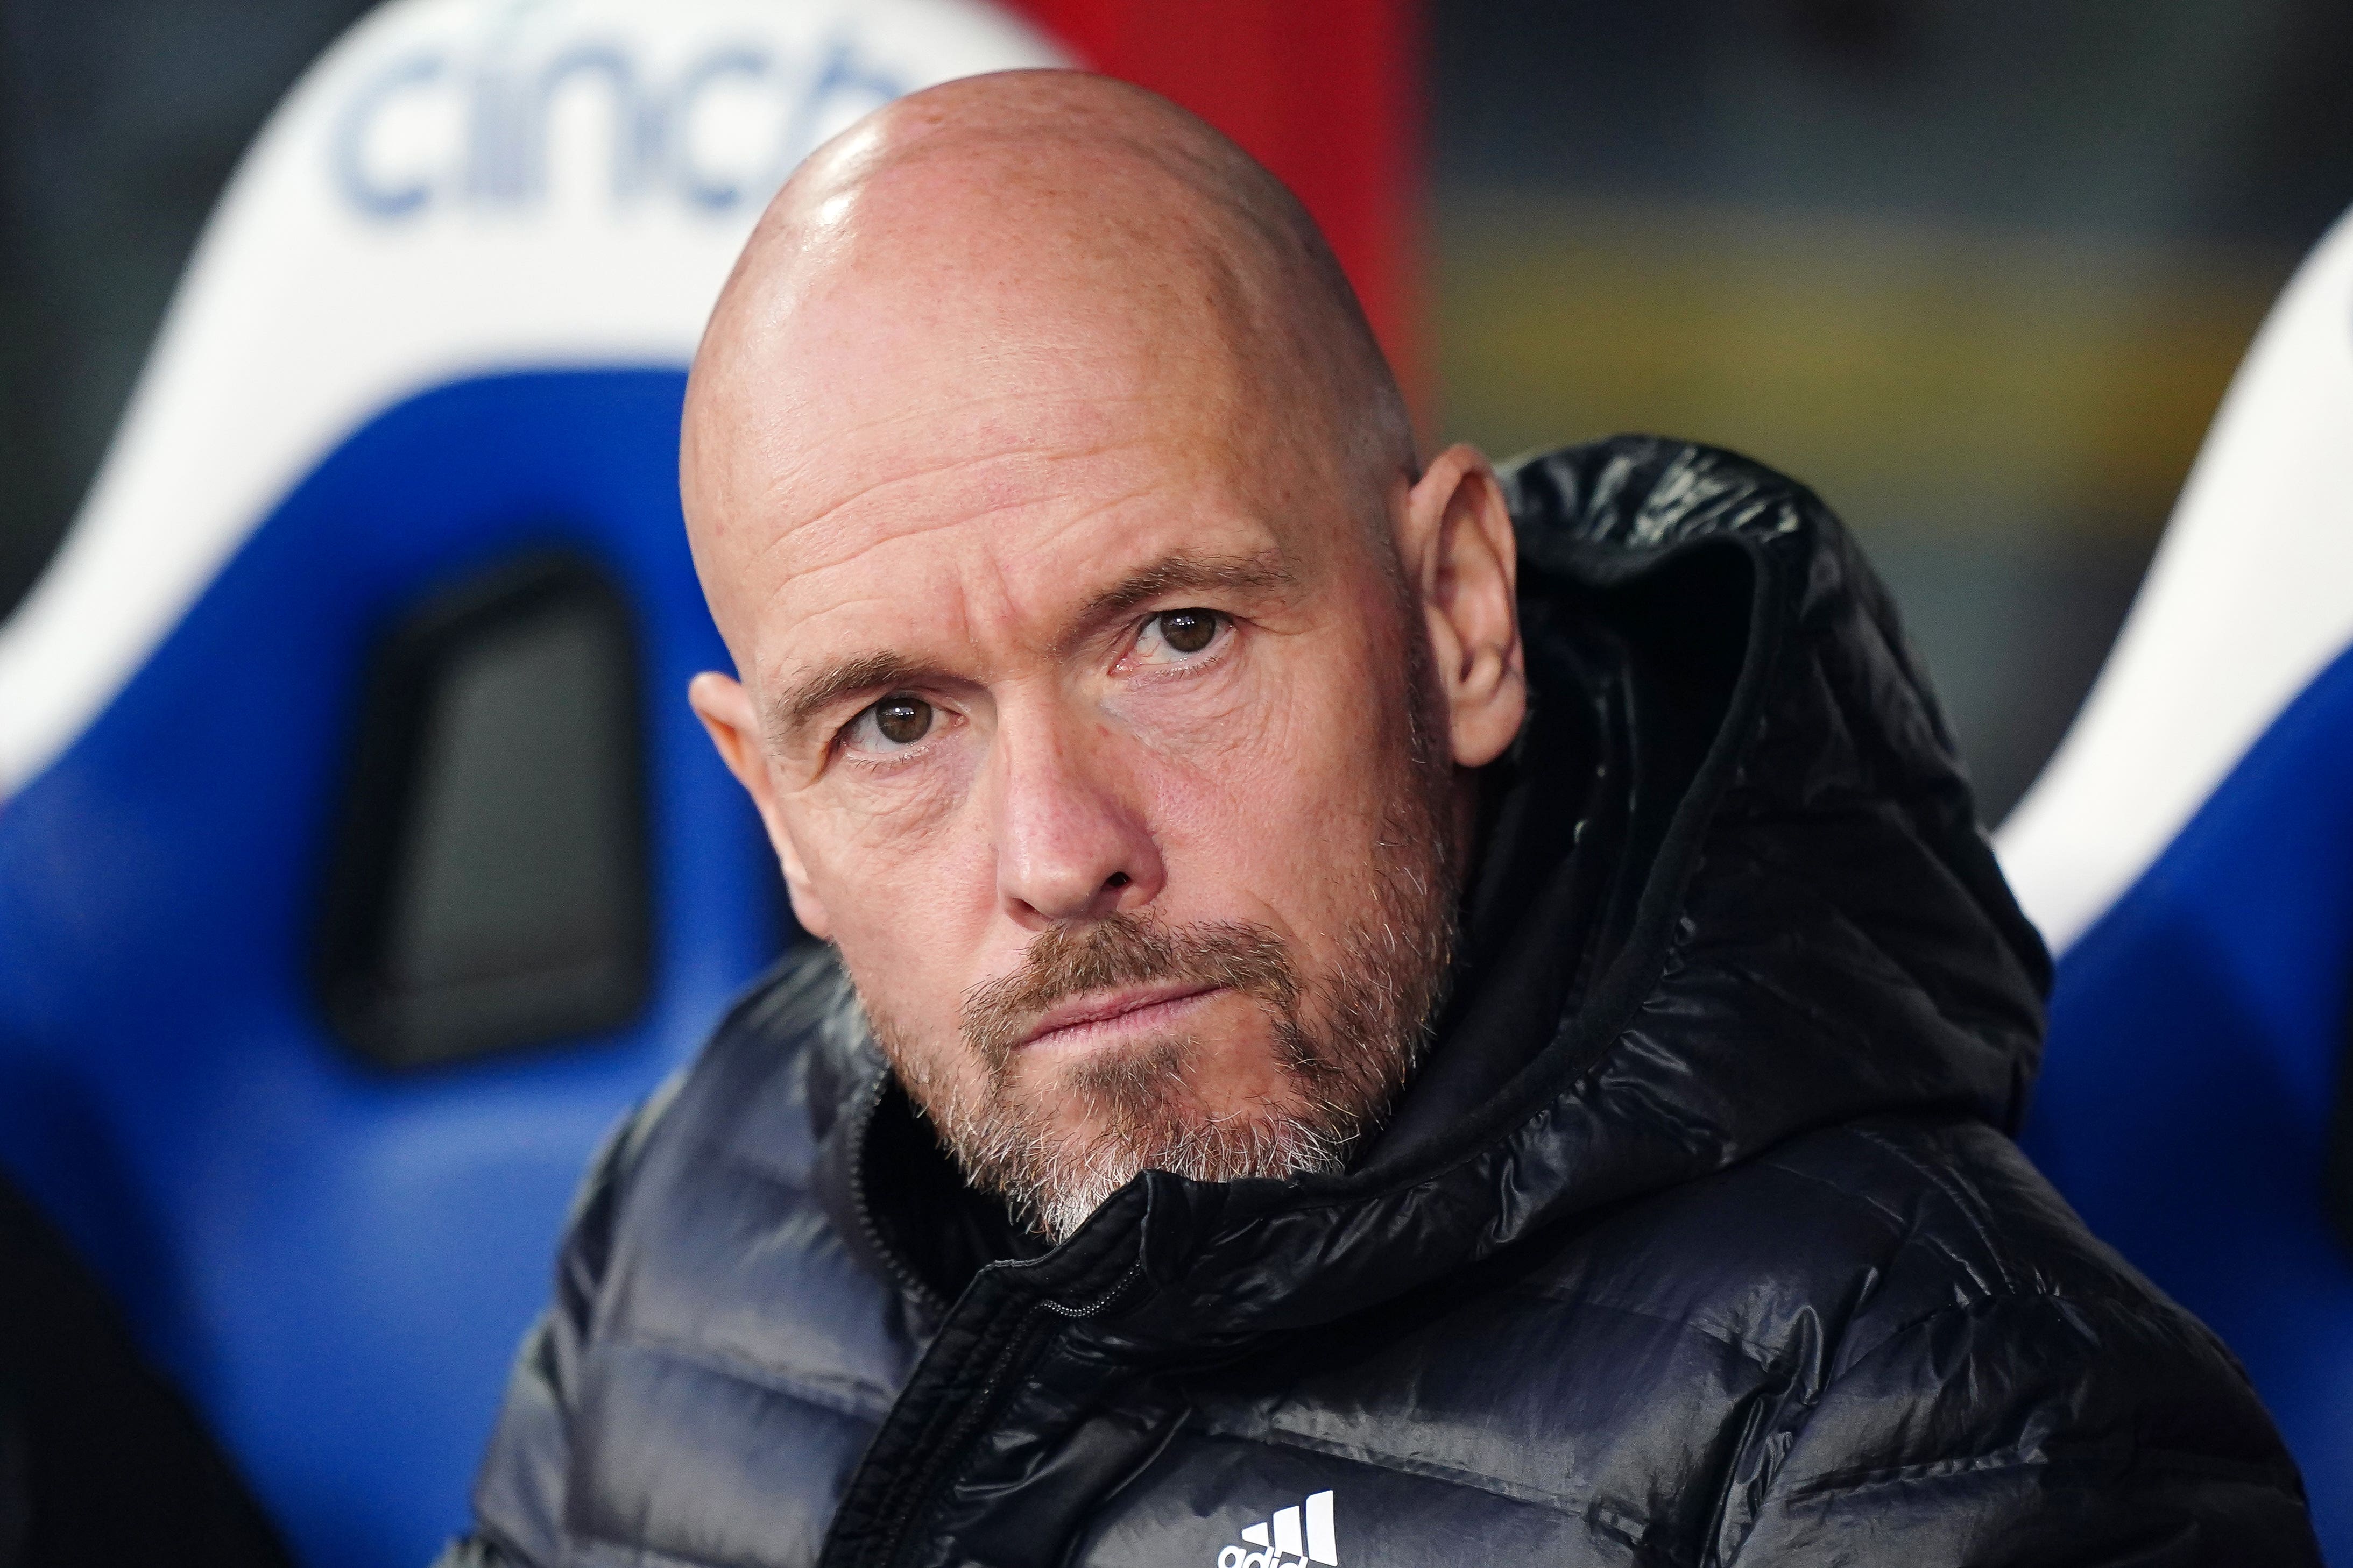 Erik ten Hag appears to be on his last legs as Man United manager